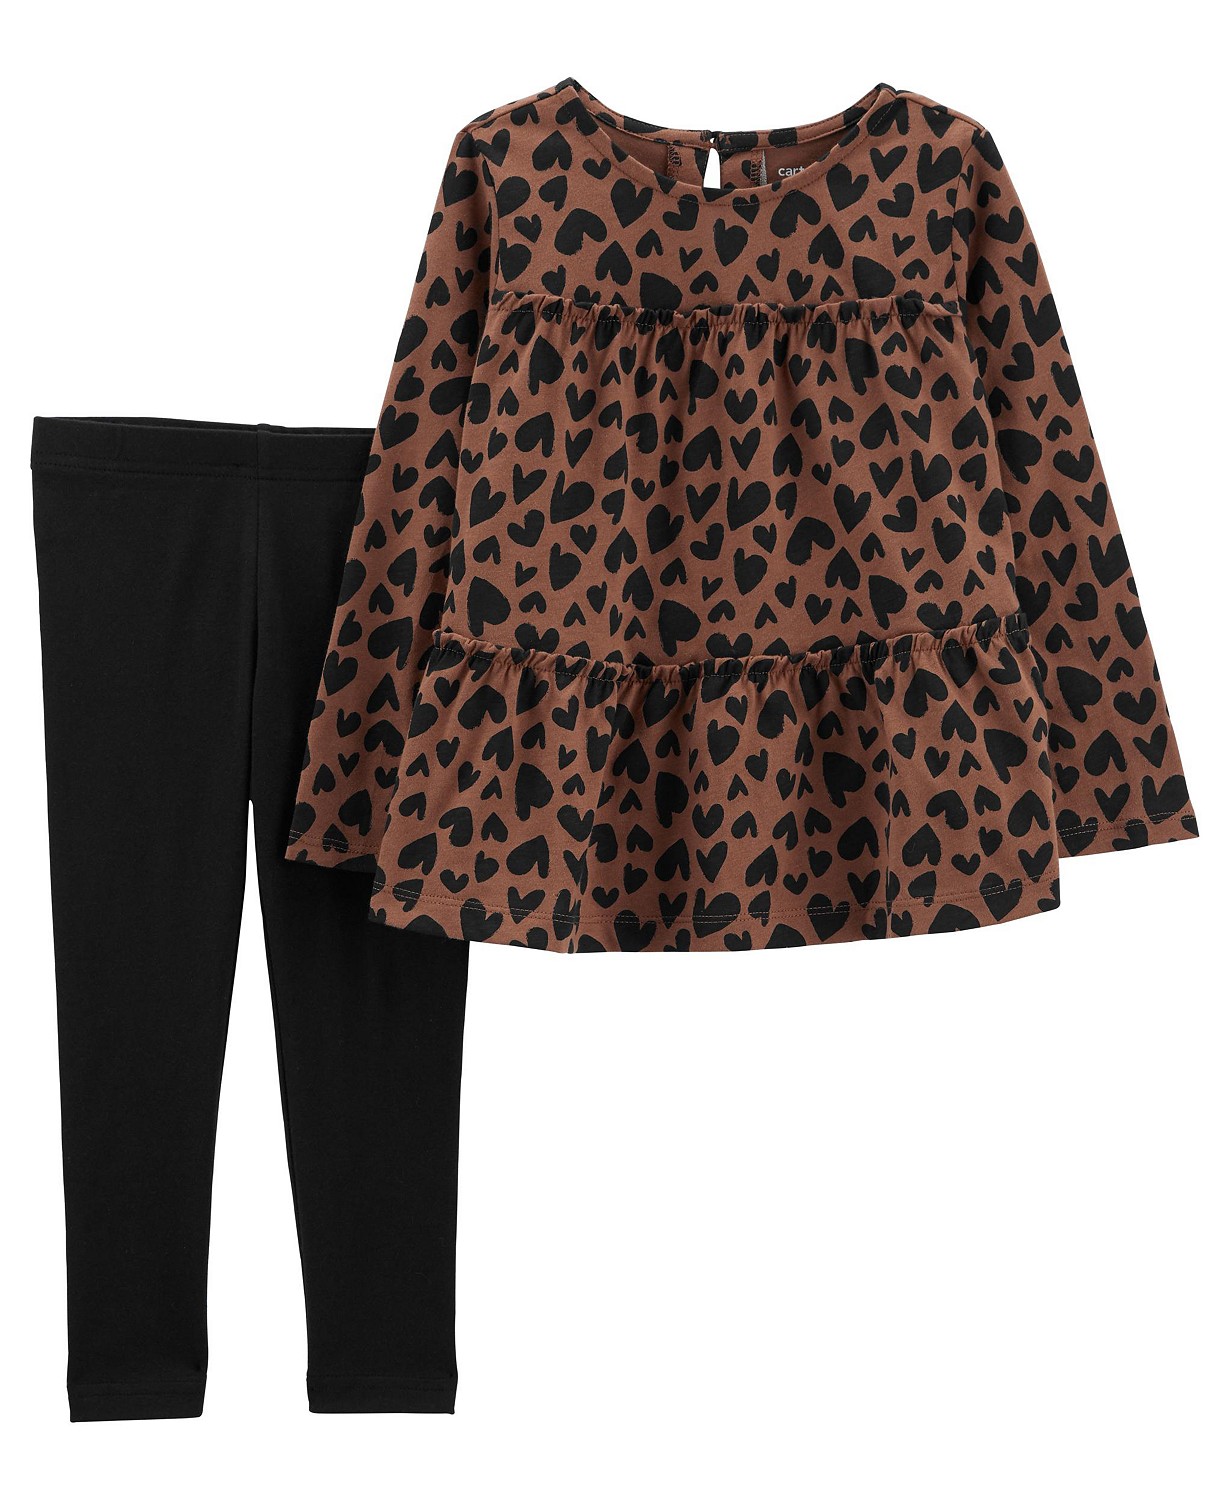 Baby Girls Leopard Top and Leggings, 2 Piece Set